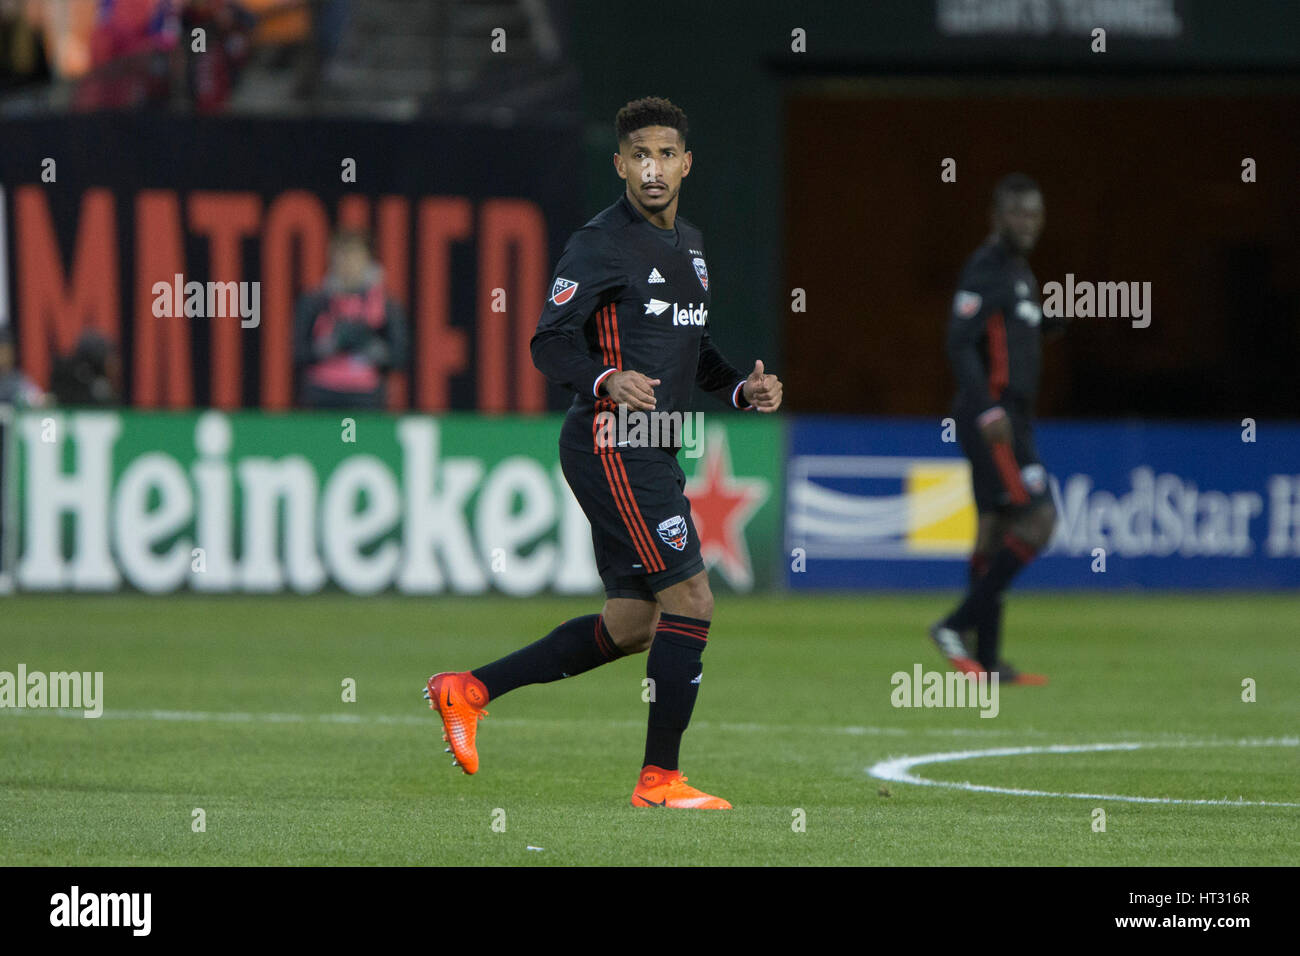 D.C. United defender Sean Franklin (5) during D.C. United's home opener against Sporting Kansas City which finished 0-0 at RFK Stadium in Washington, D.C. on Saturday March 4, 2017. Stock Photo